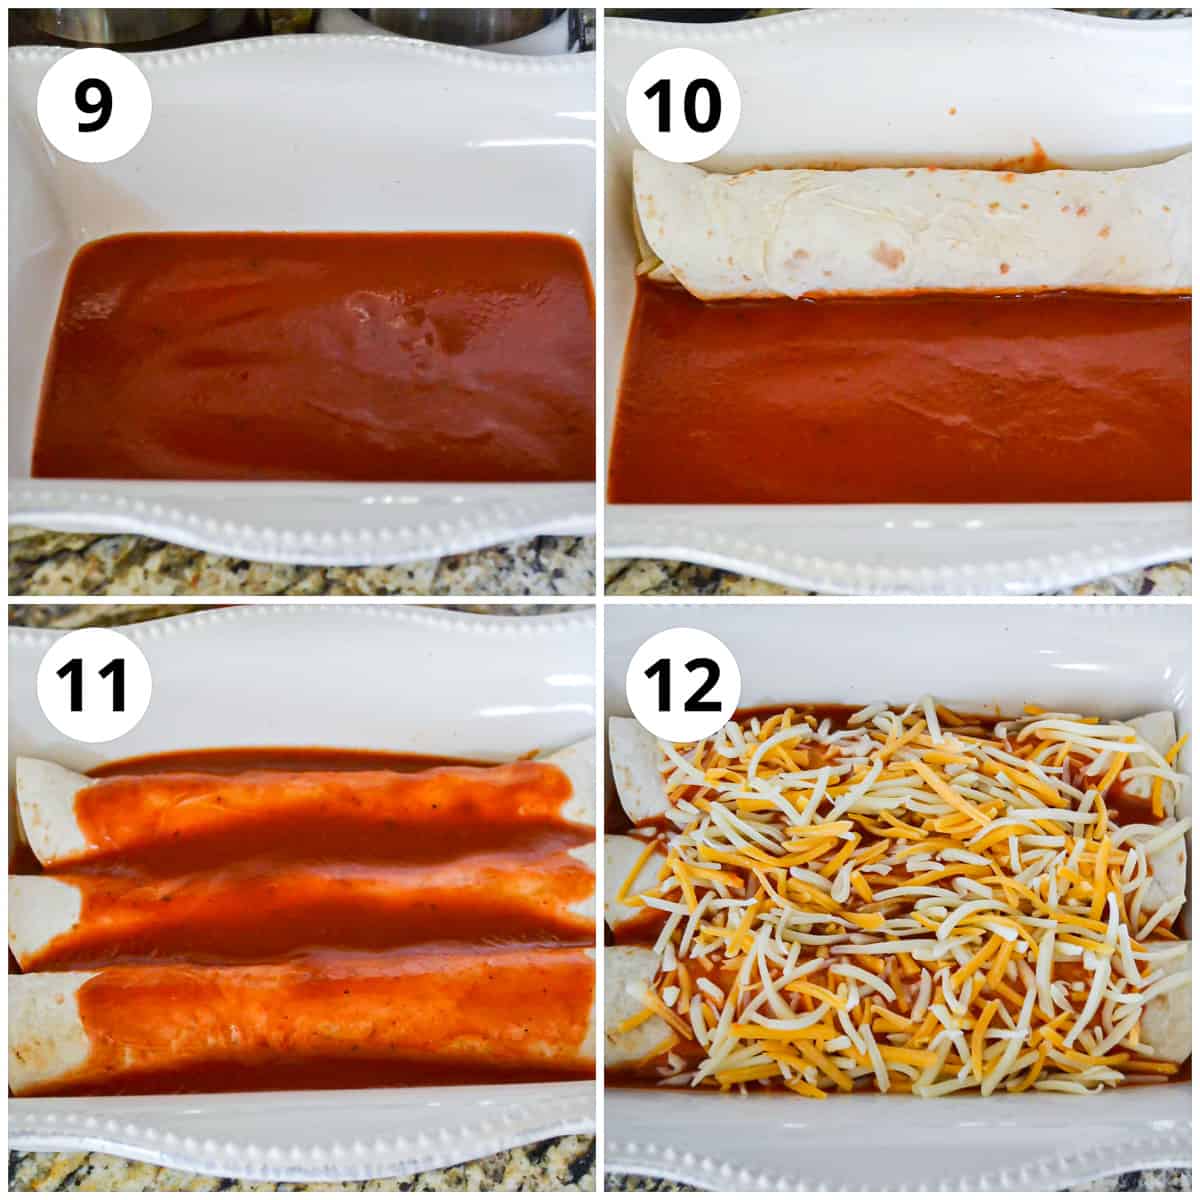 Step by step photos to show how to place the tortillas and sauce in a baking dish